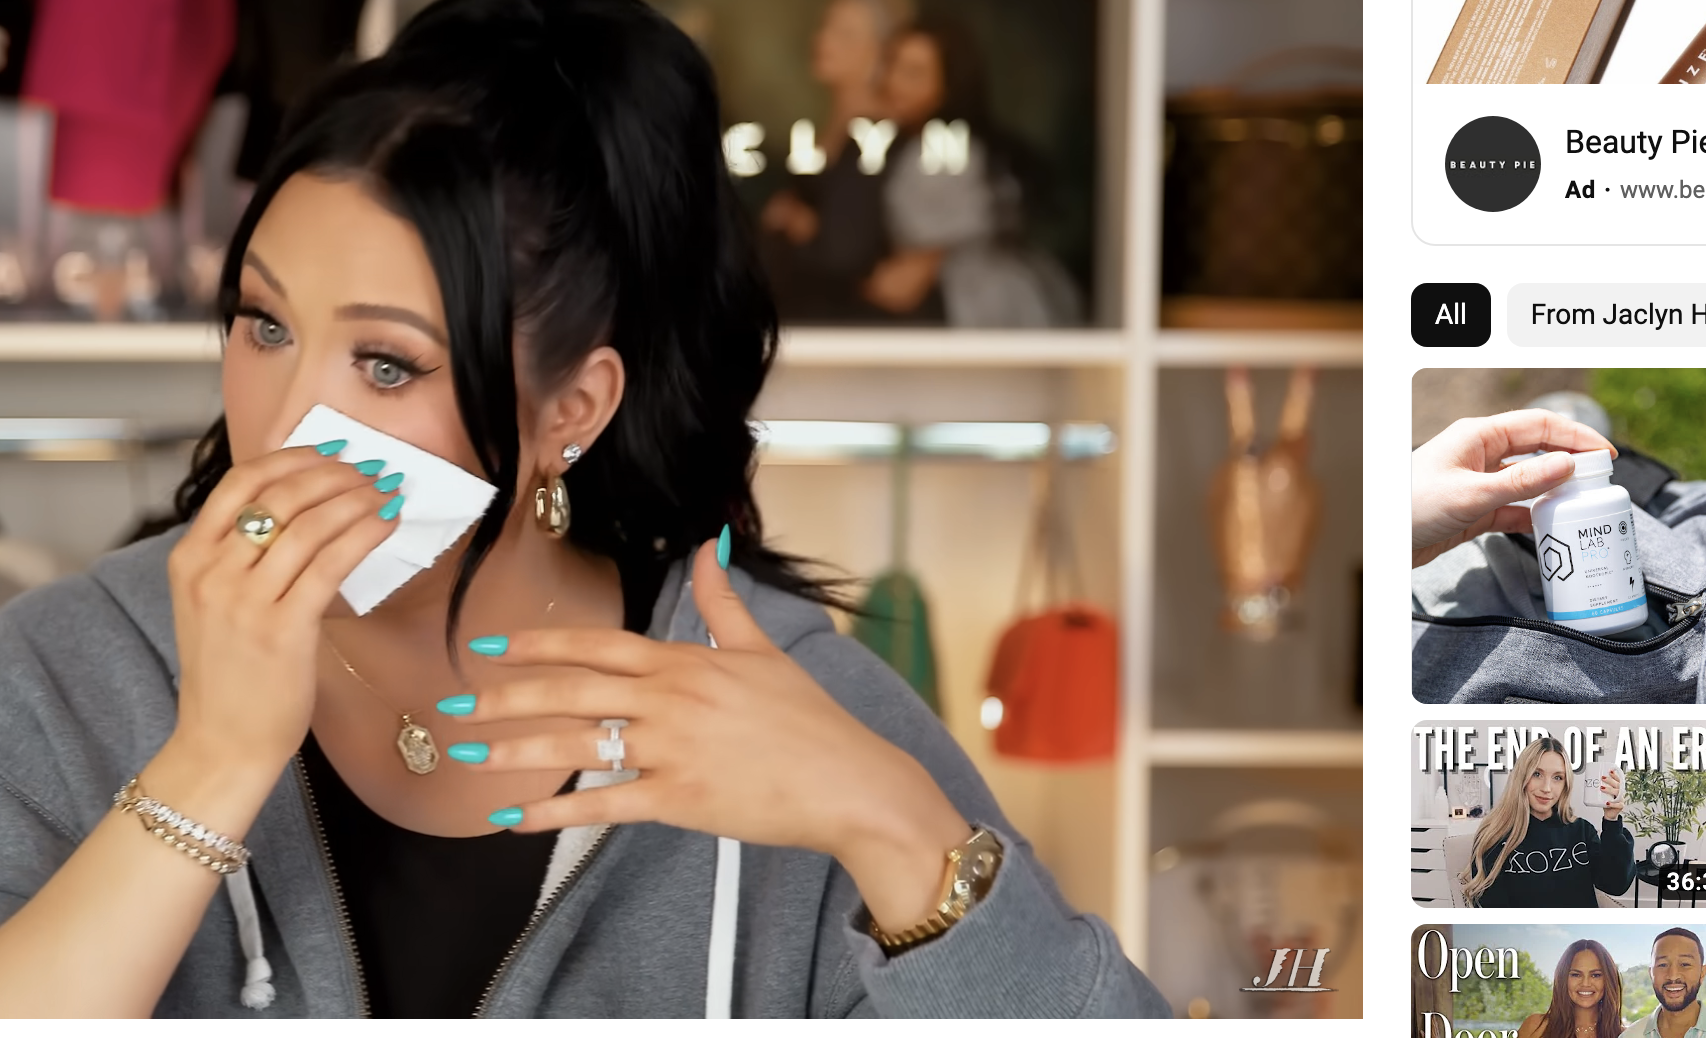 Jaclyn Hill's lipstick controversy explained: Instagram reel